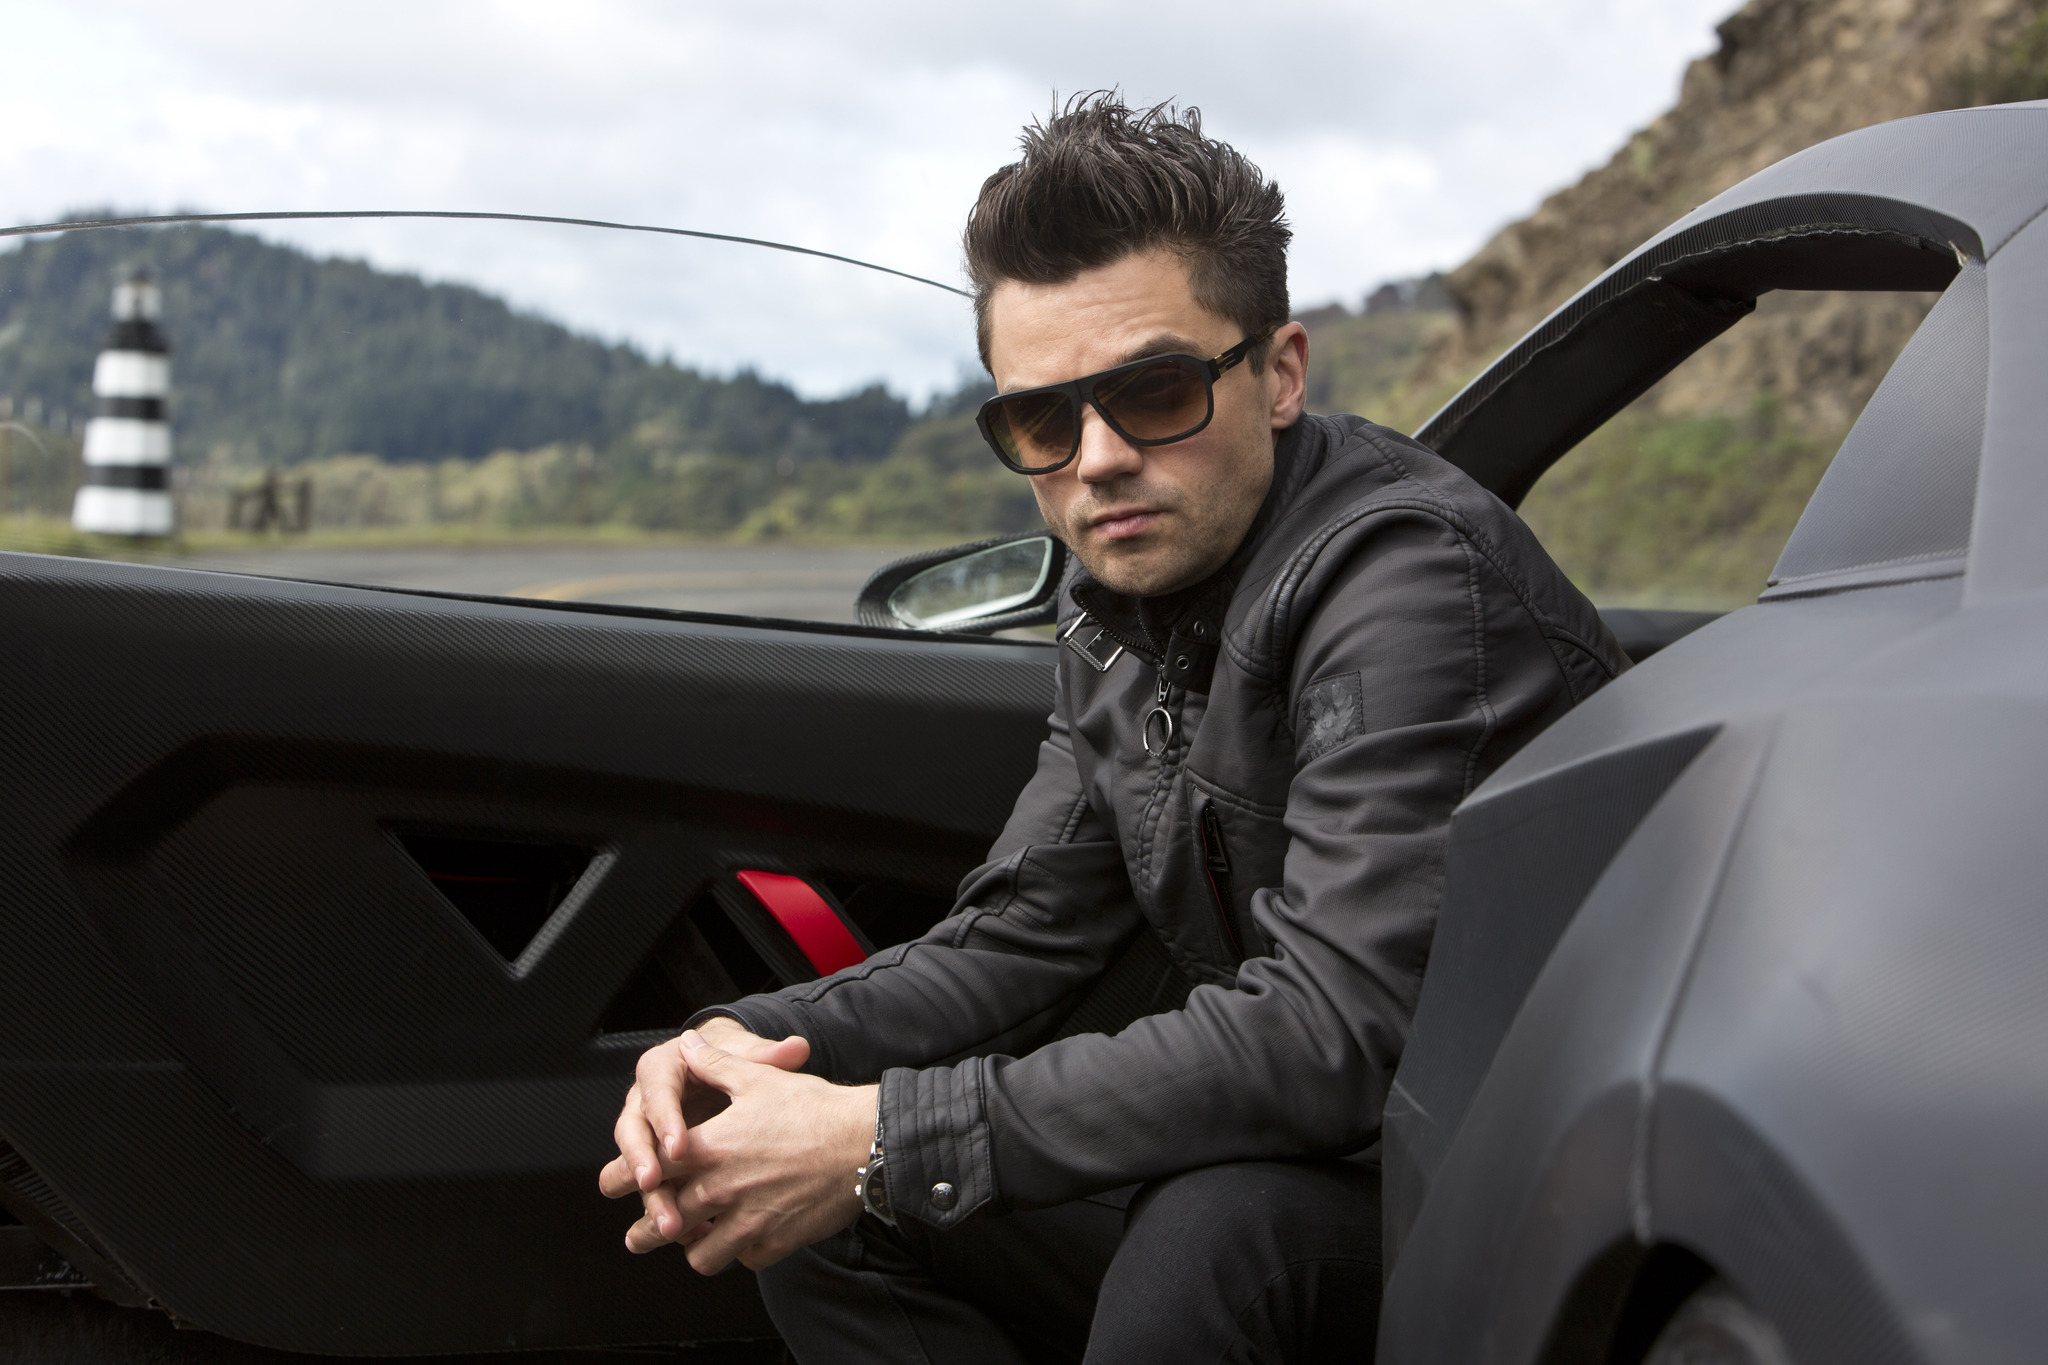 Still of Dominic Cooper in Need for Speed. Istroske greicio (2014)